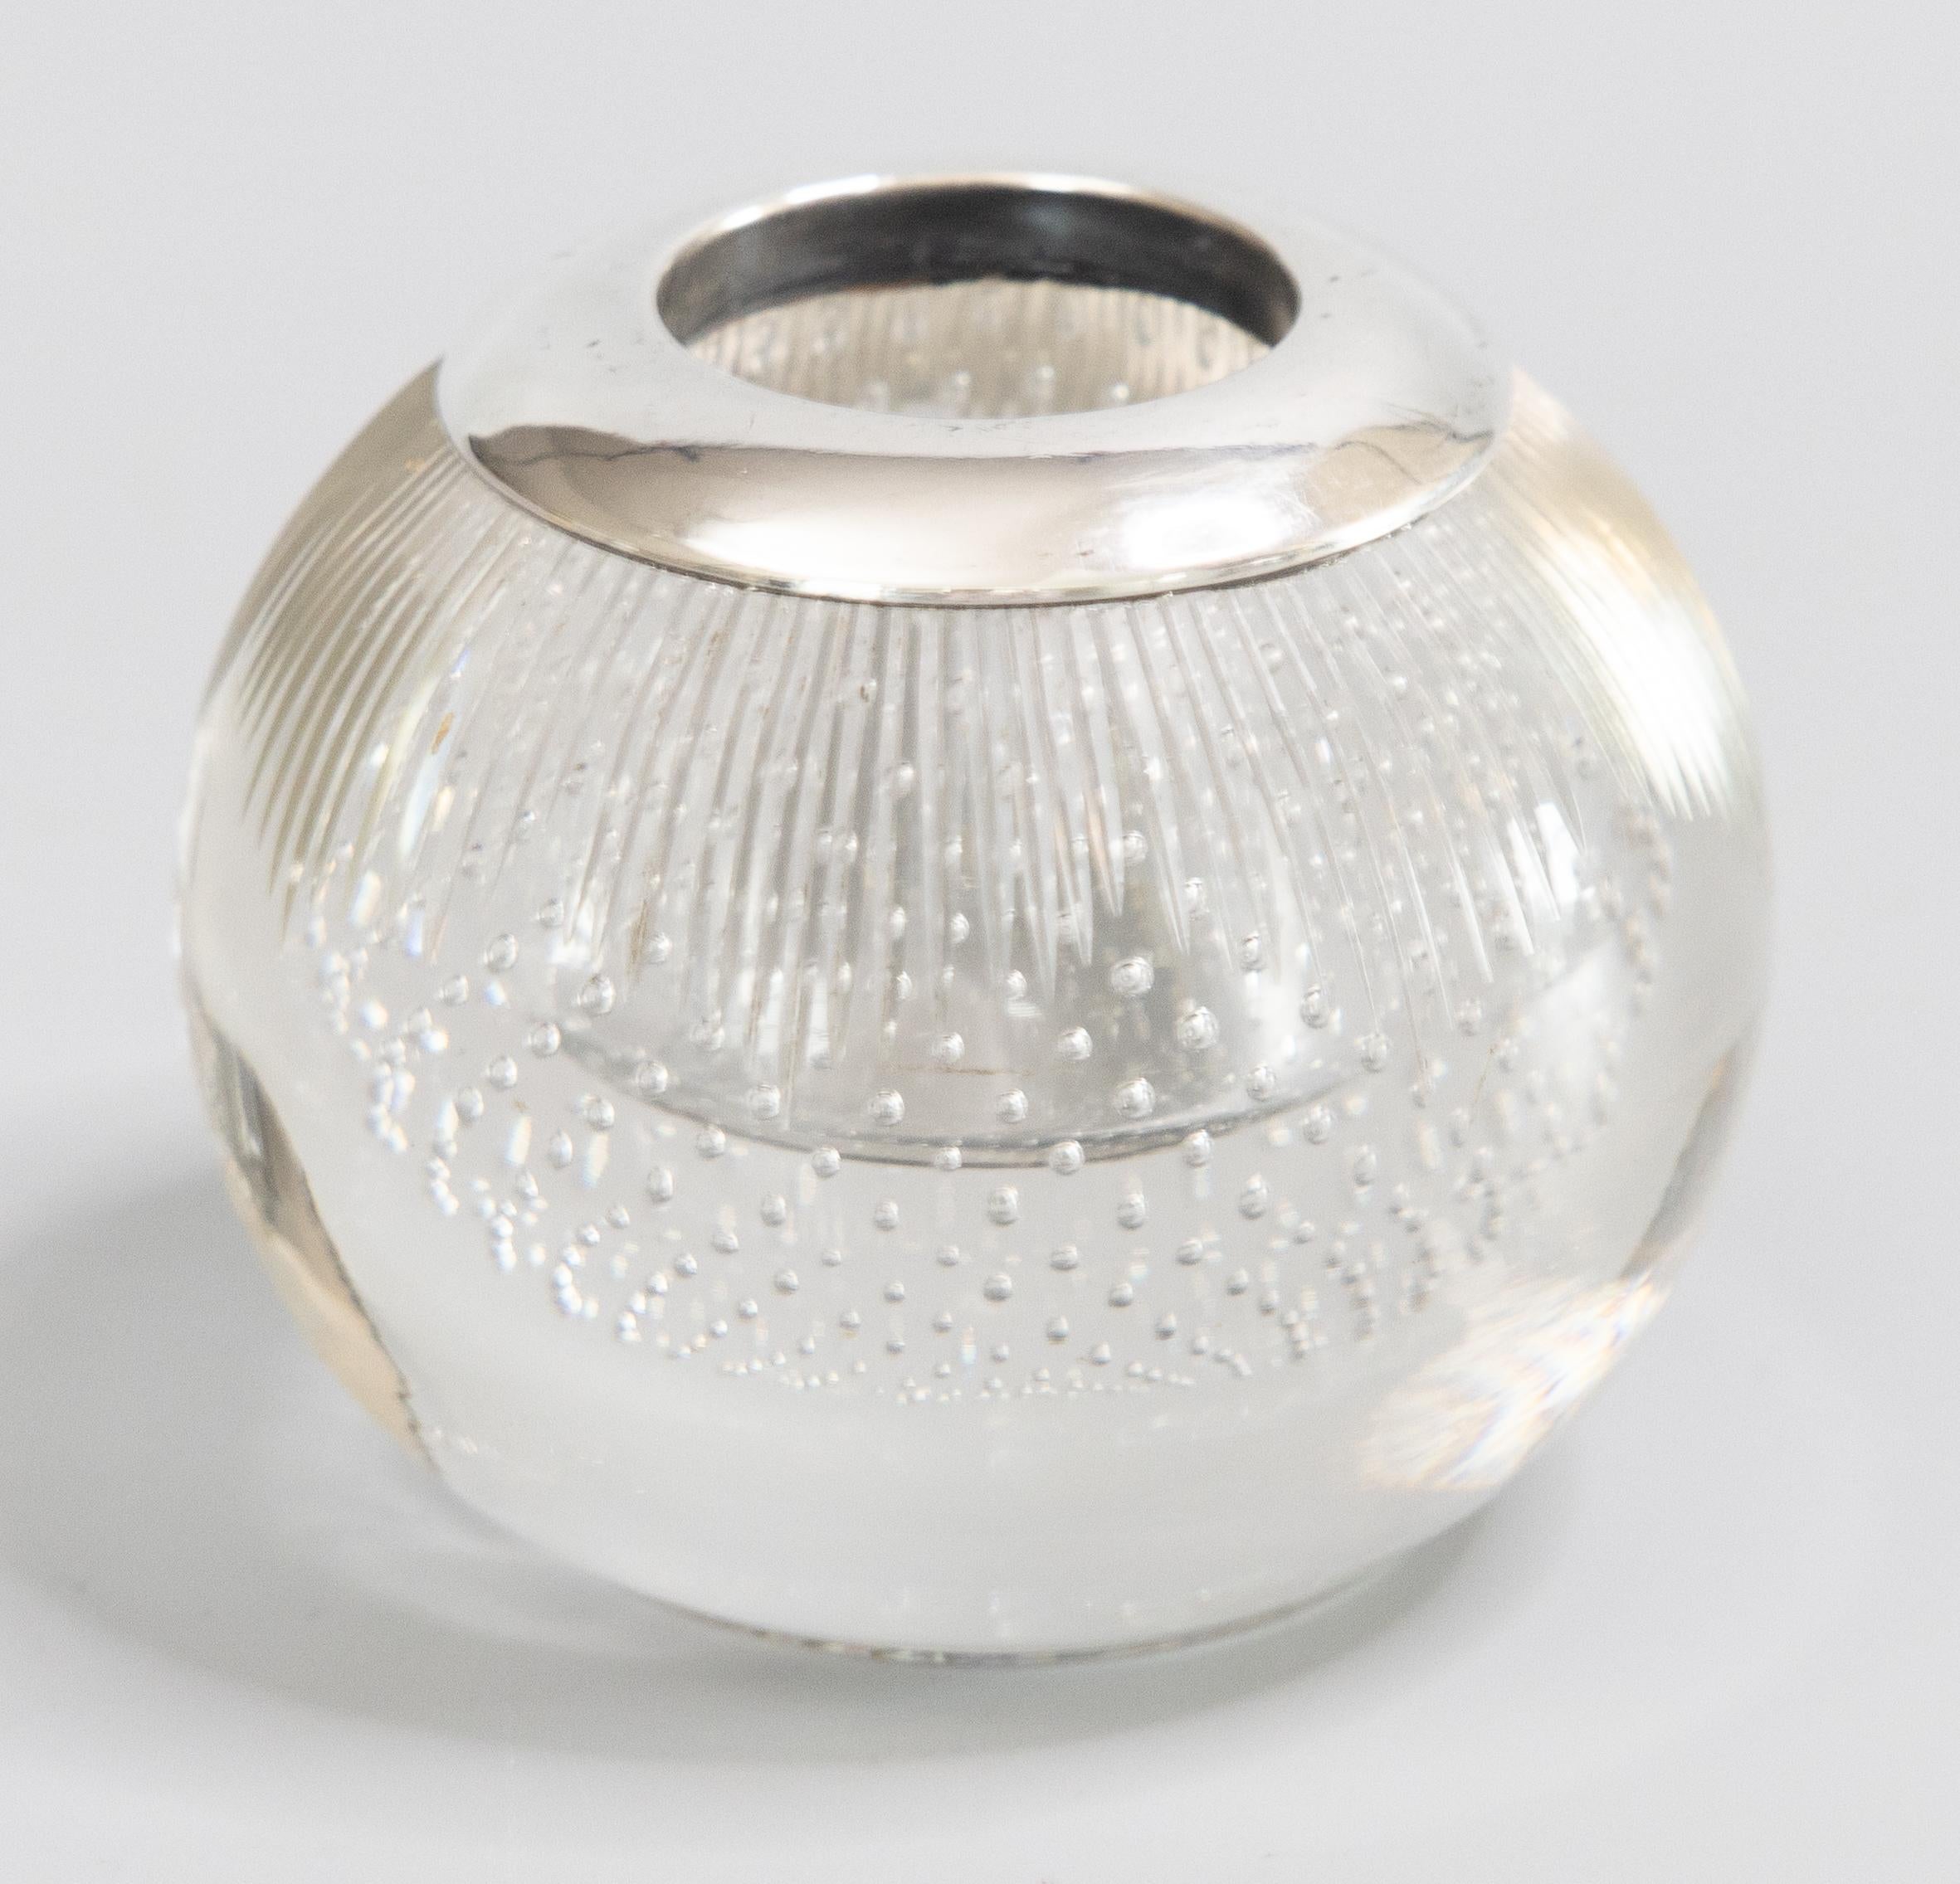 A stunning antique English sterling silver and ribbed glass with controlled bubbles match striker / holder by Charles James Fox, London, c. 1899. Hallmarked on collar. This fine match holder is sleek and stylish, perfect for the modern